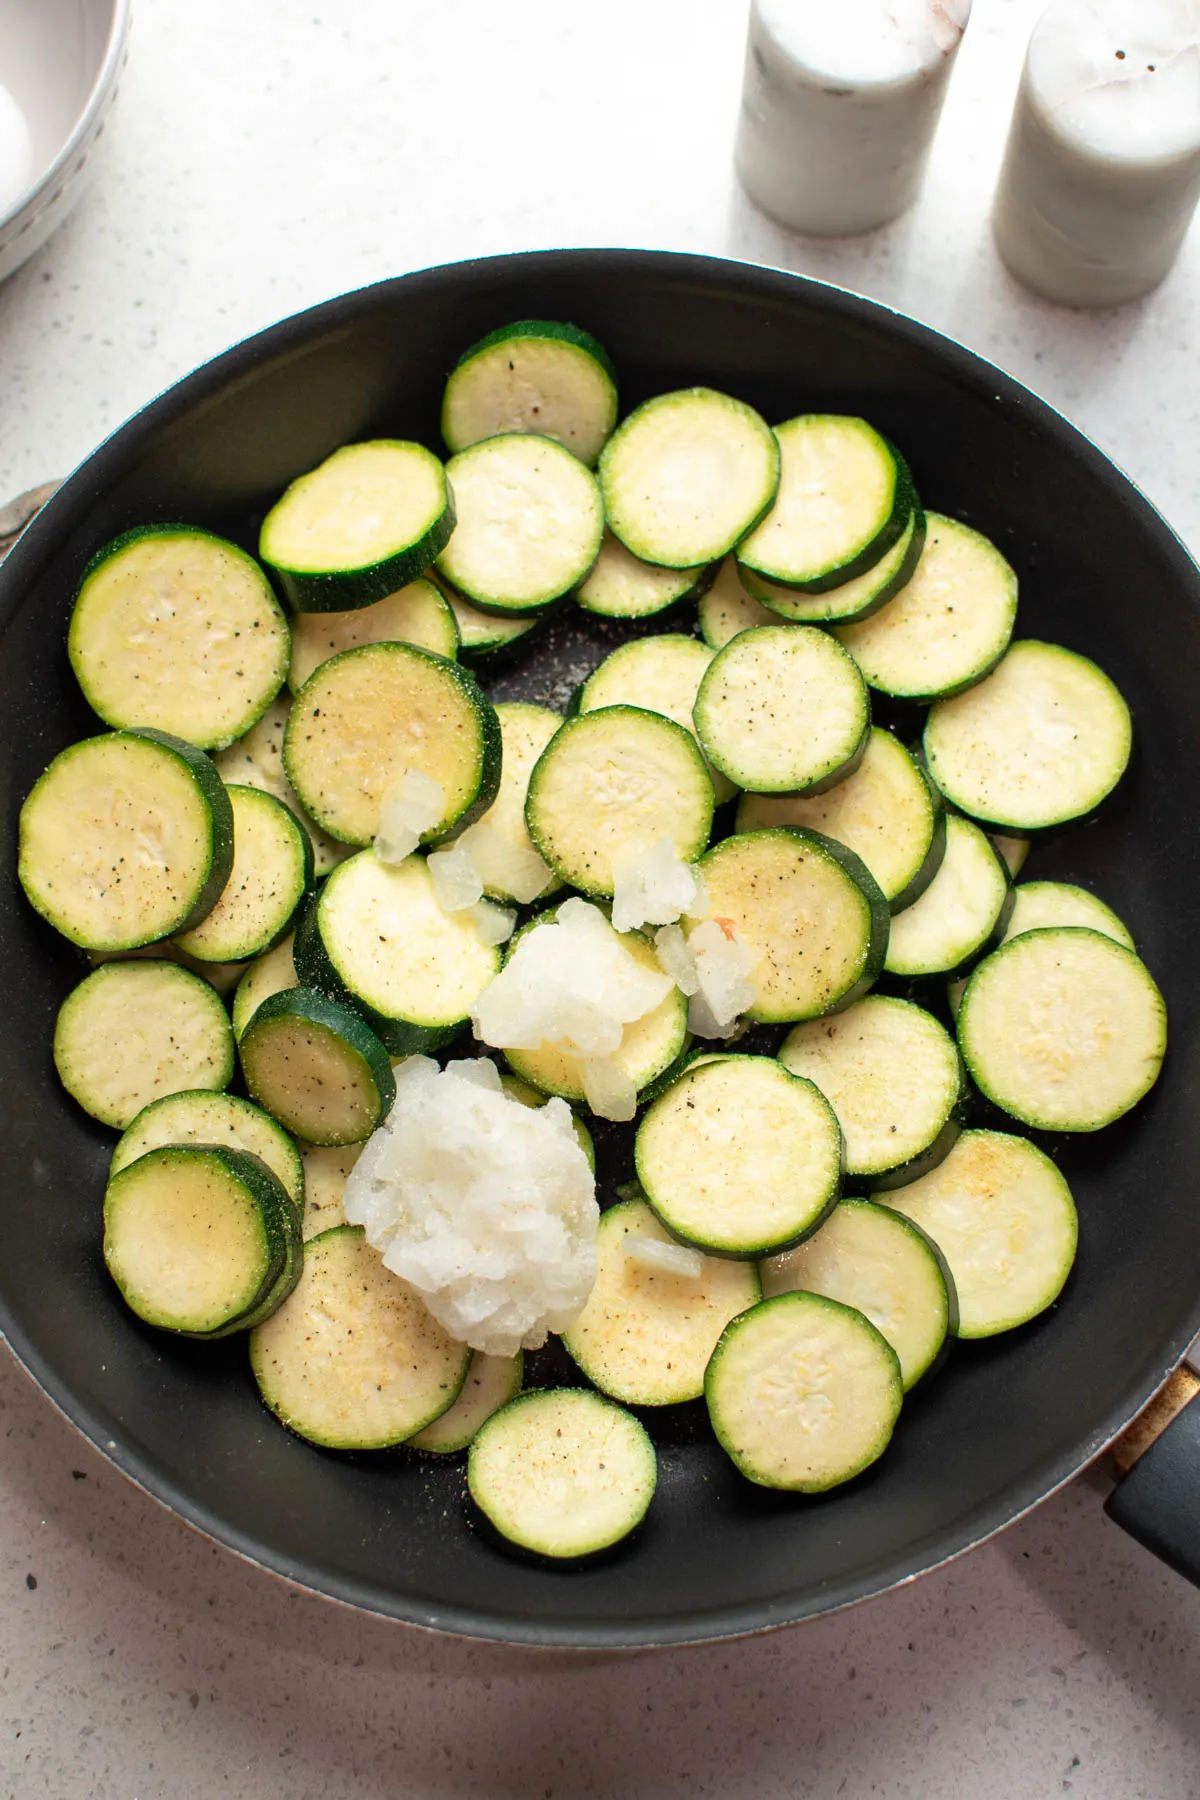 Black frying pan with raw sliced zucchini, frozen onions, and seasoning on quartz countertop.